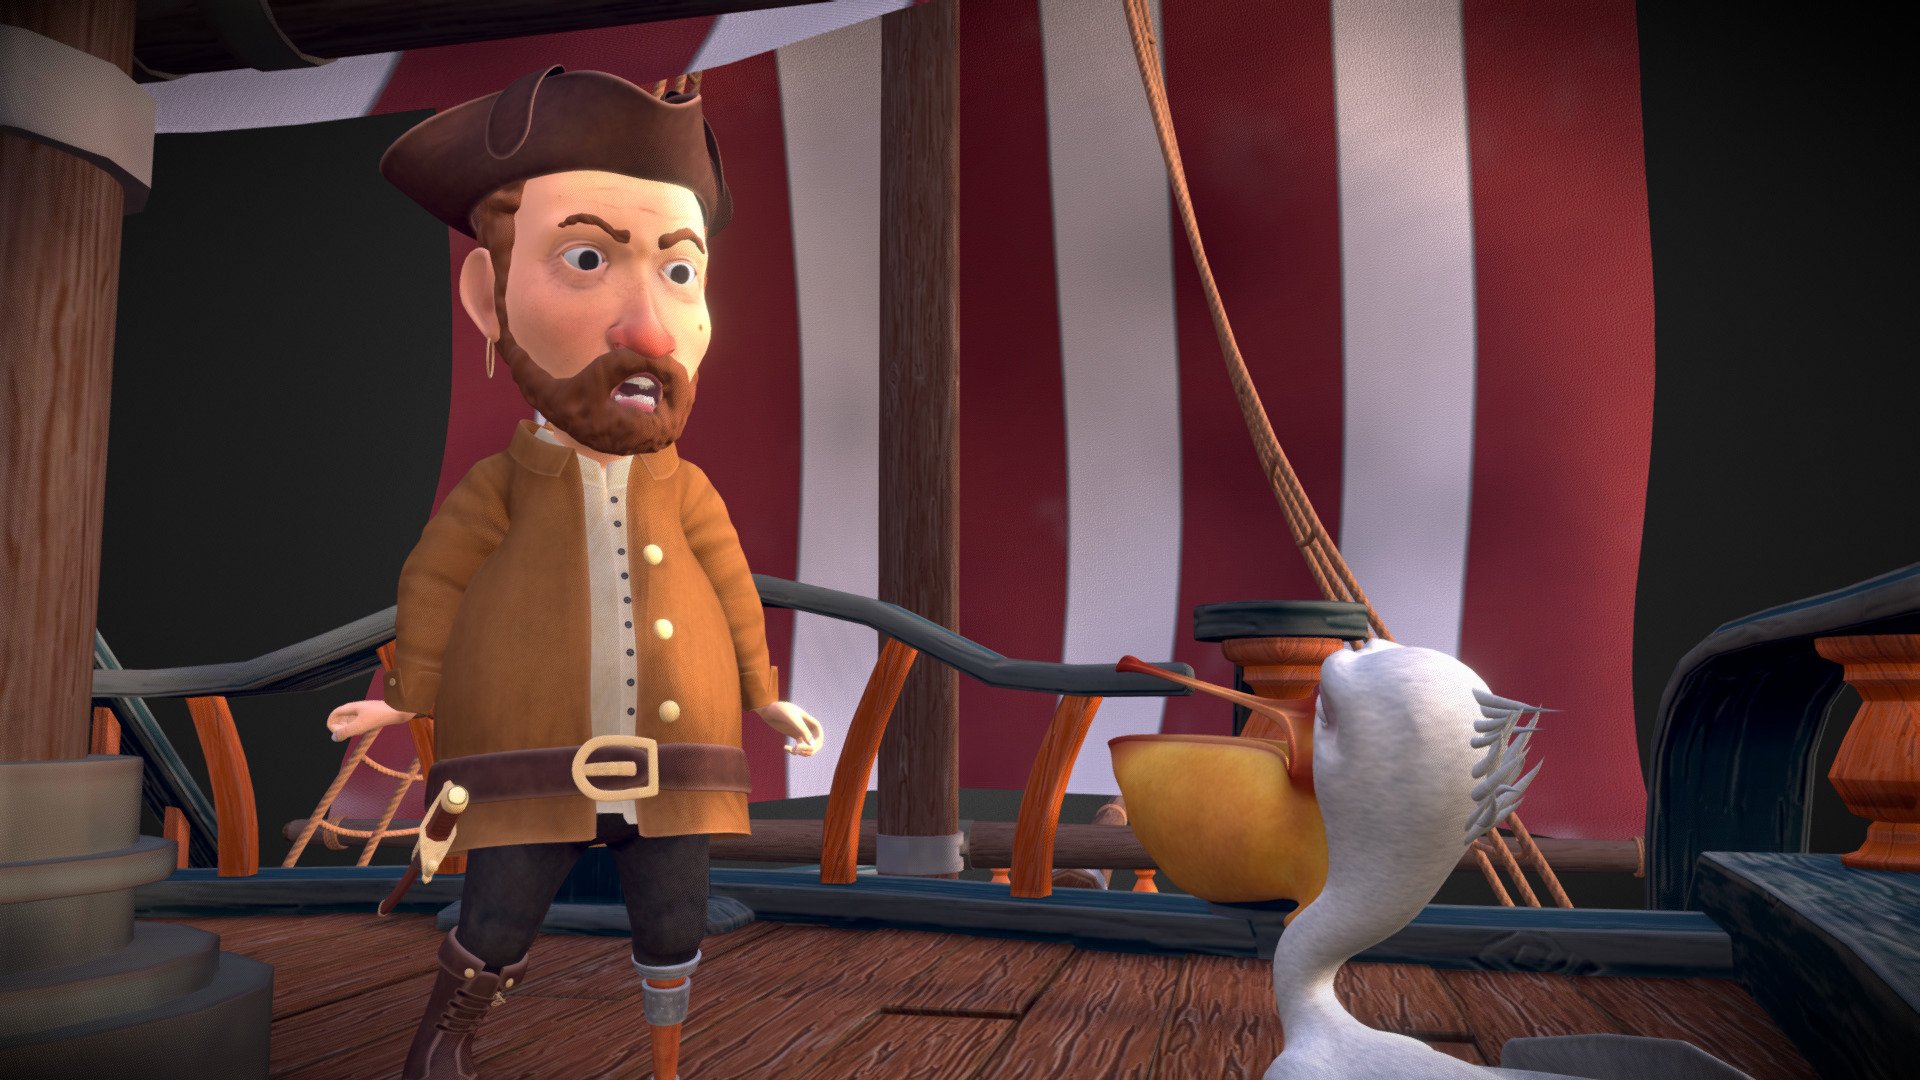 Pirate ship, 2nd year project, 2017-2018
Pirate, Rhum et Pélican

You can see the short film here : http://quentinotani.wixsite.com/portfolio/animation?wix-vod-video-id=cc3994af0e324264a4362ce4665b2075&amp;wix-vod-comp-id=comp-iwgurvh0# - Pirate Ship - 3D model by Quentin Otani (@quentinotani) 3d model